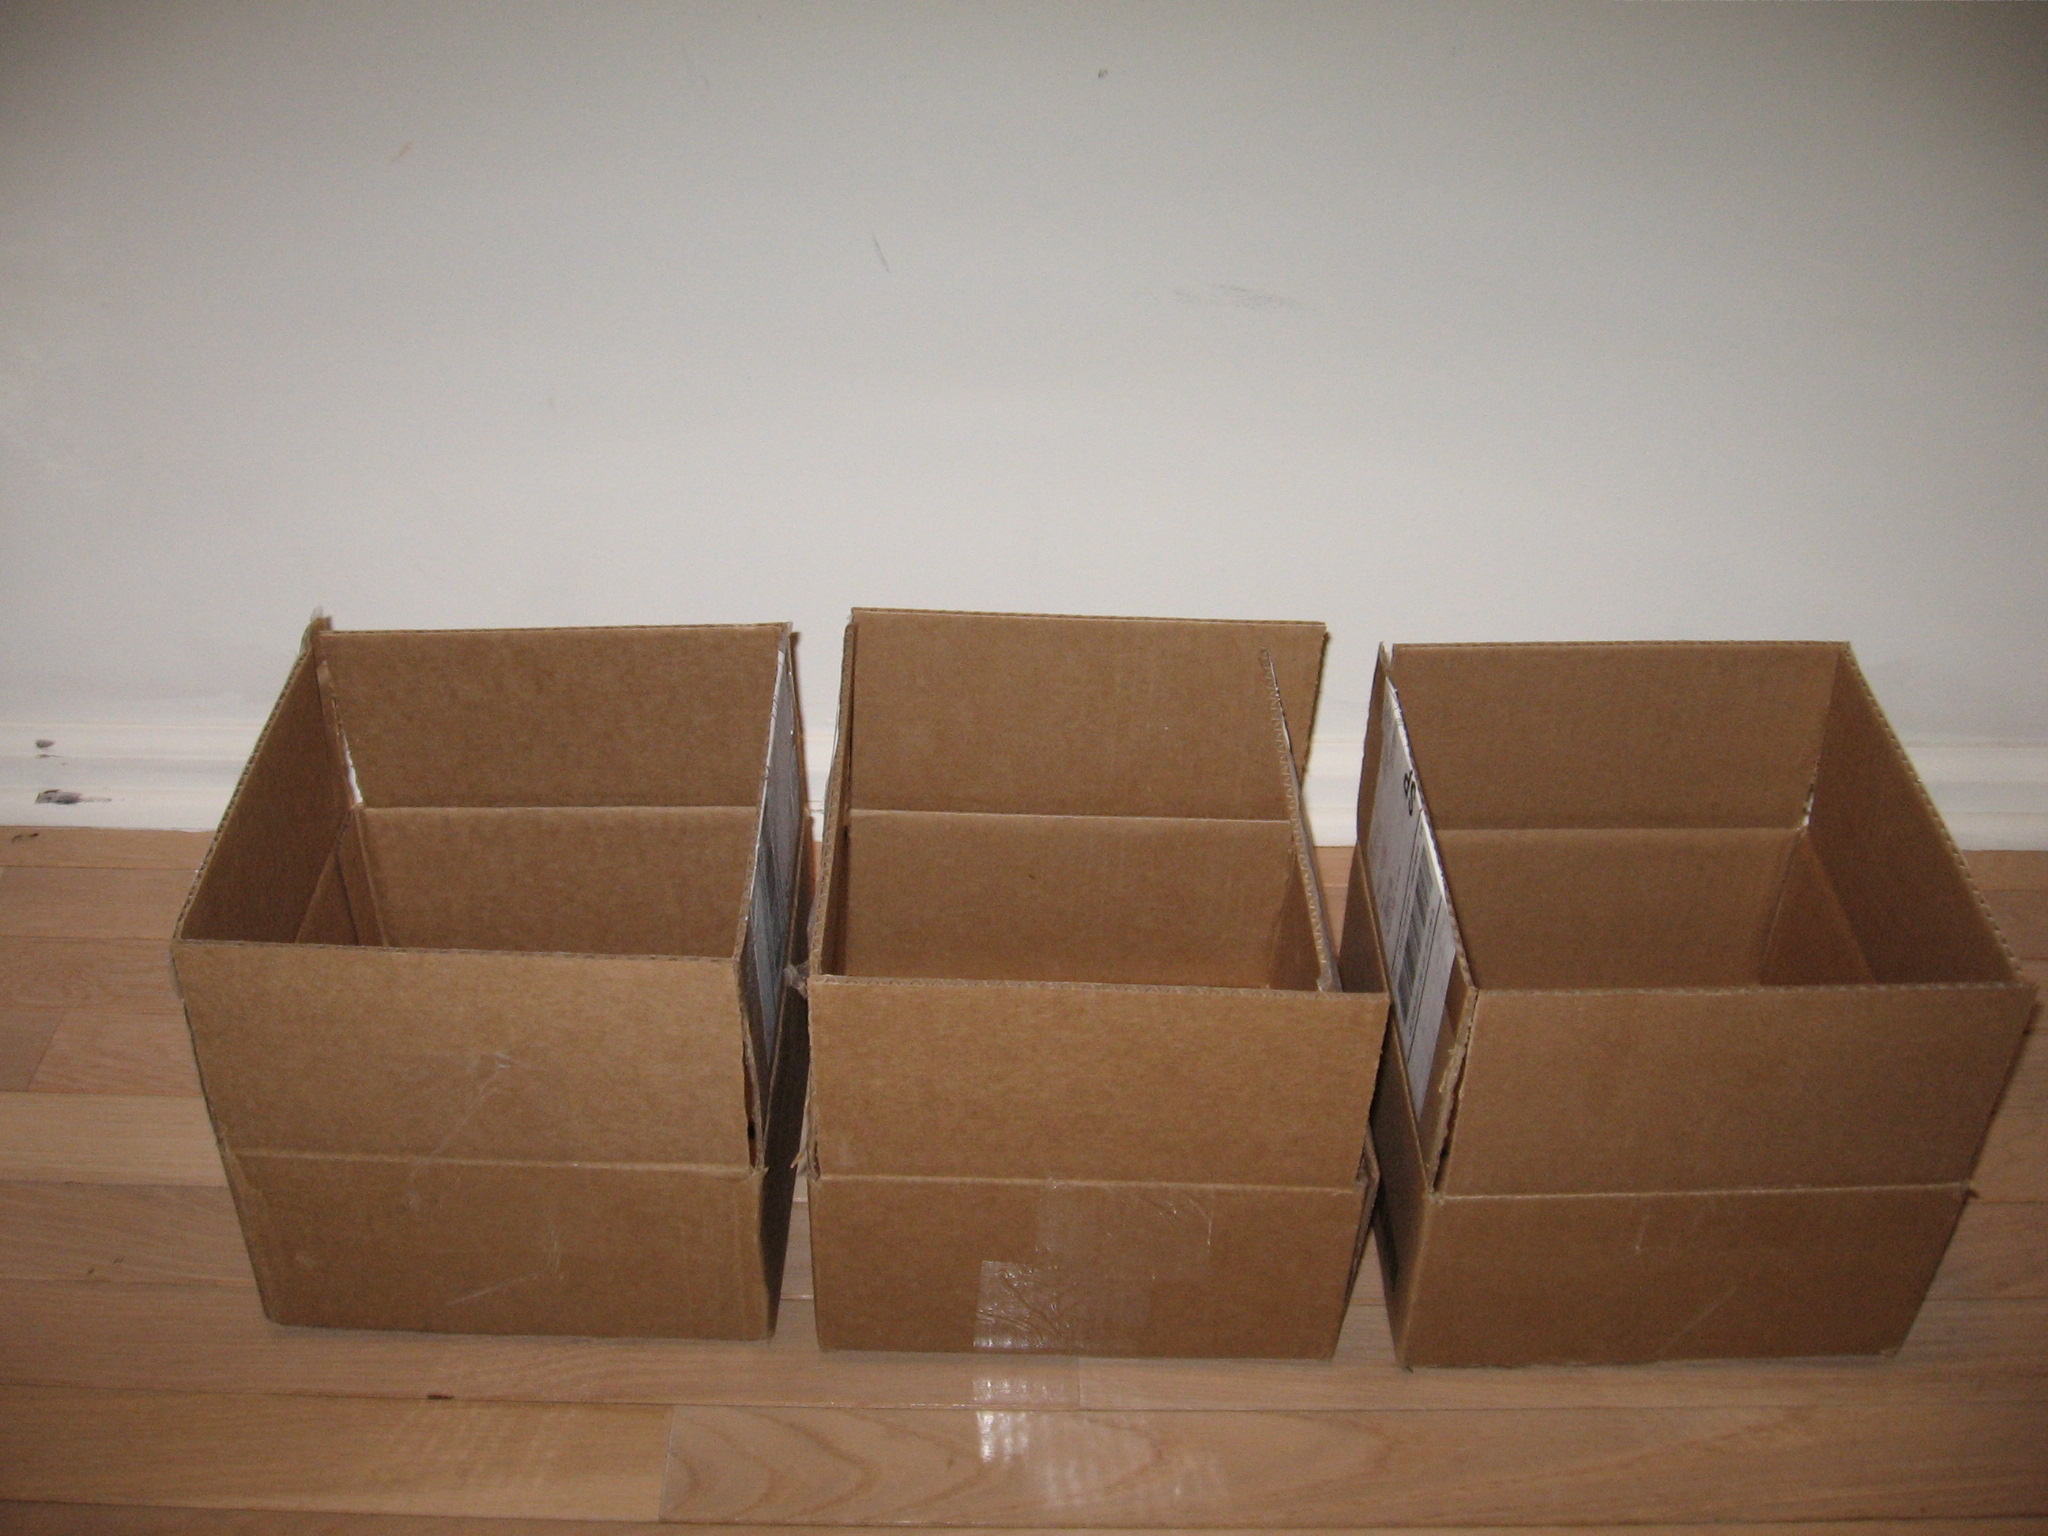 six boxes are sitting on the floor in a box